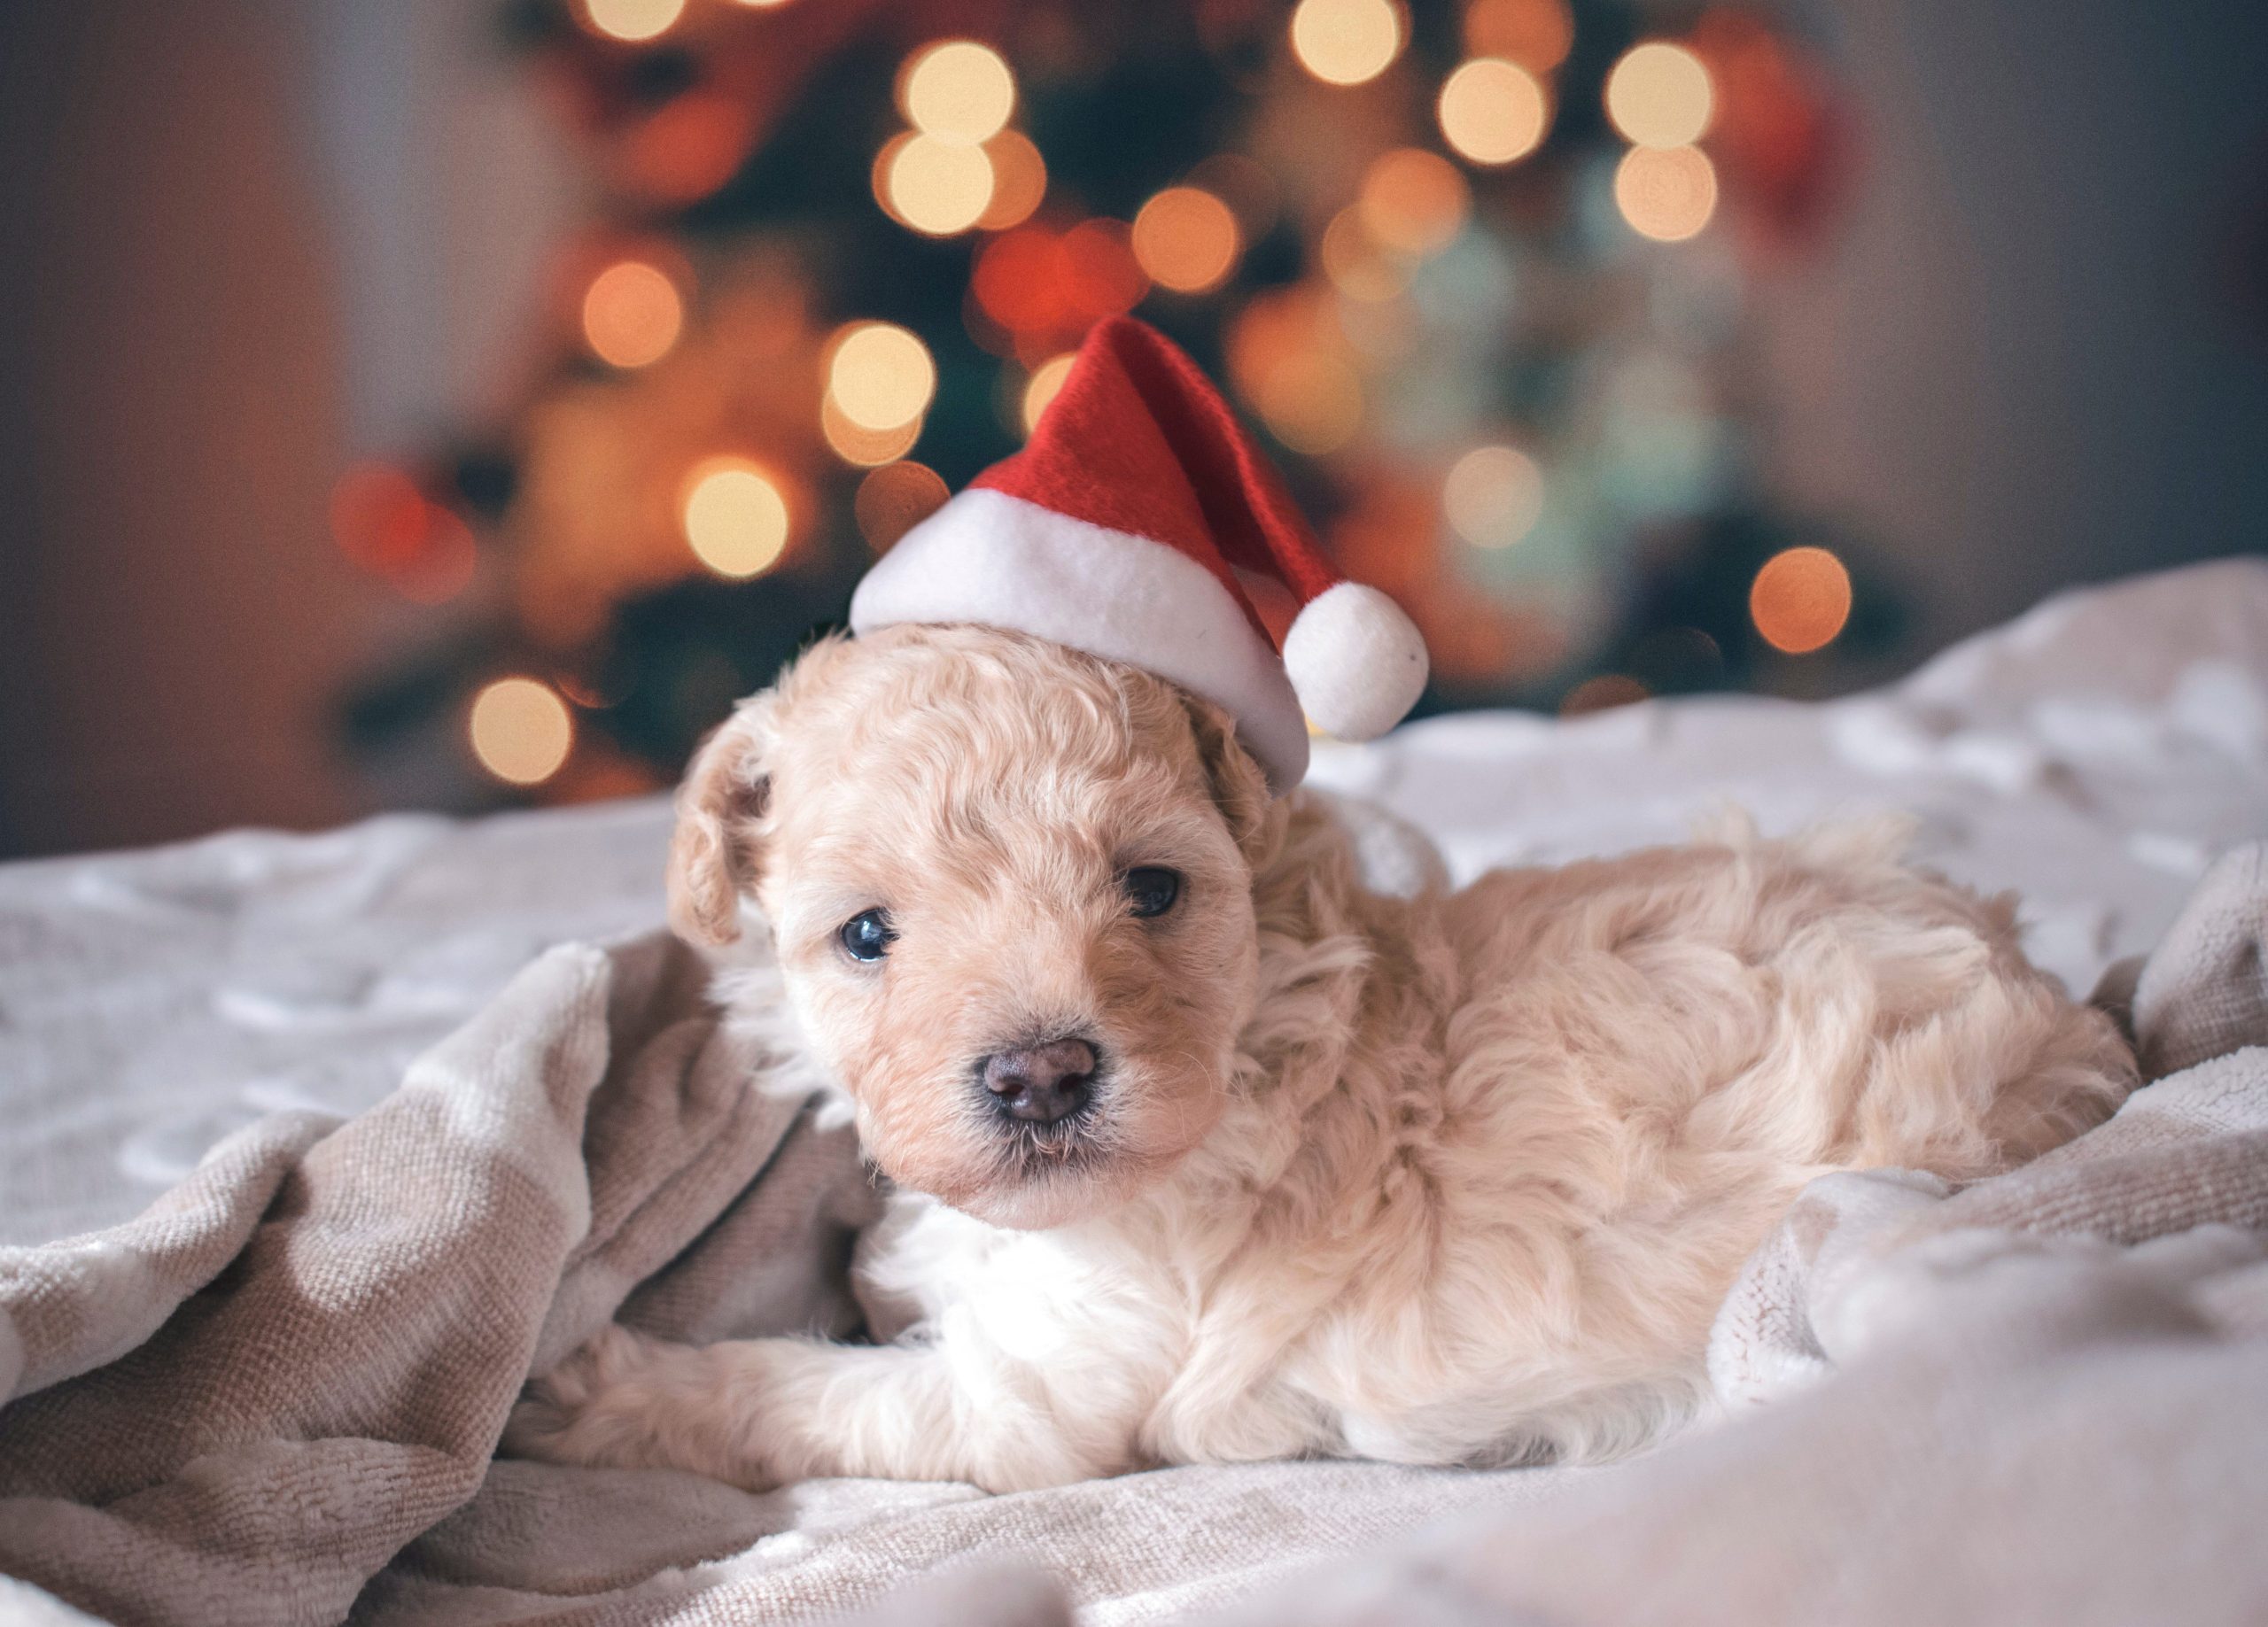 Cute Christmas Puppy Wallpapers To Download For Free - Funny Christmas Captions , HD Wallpaper & Backgrounds